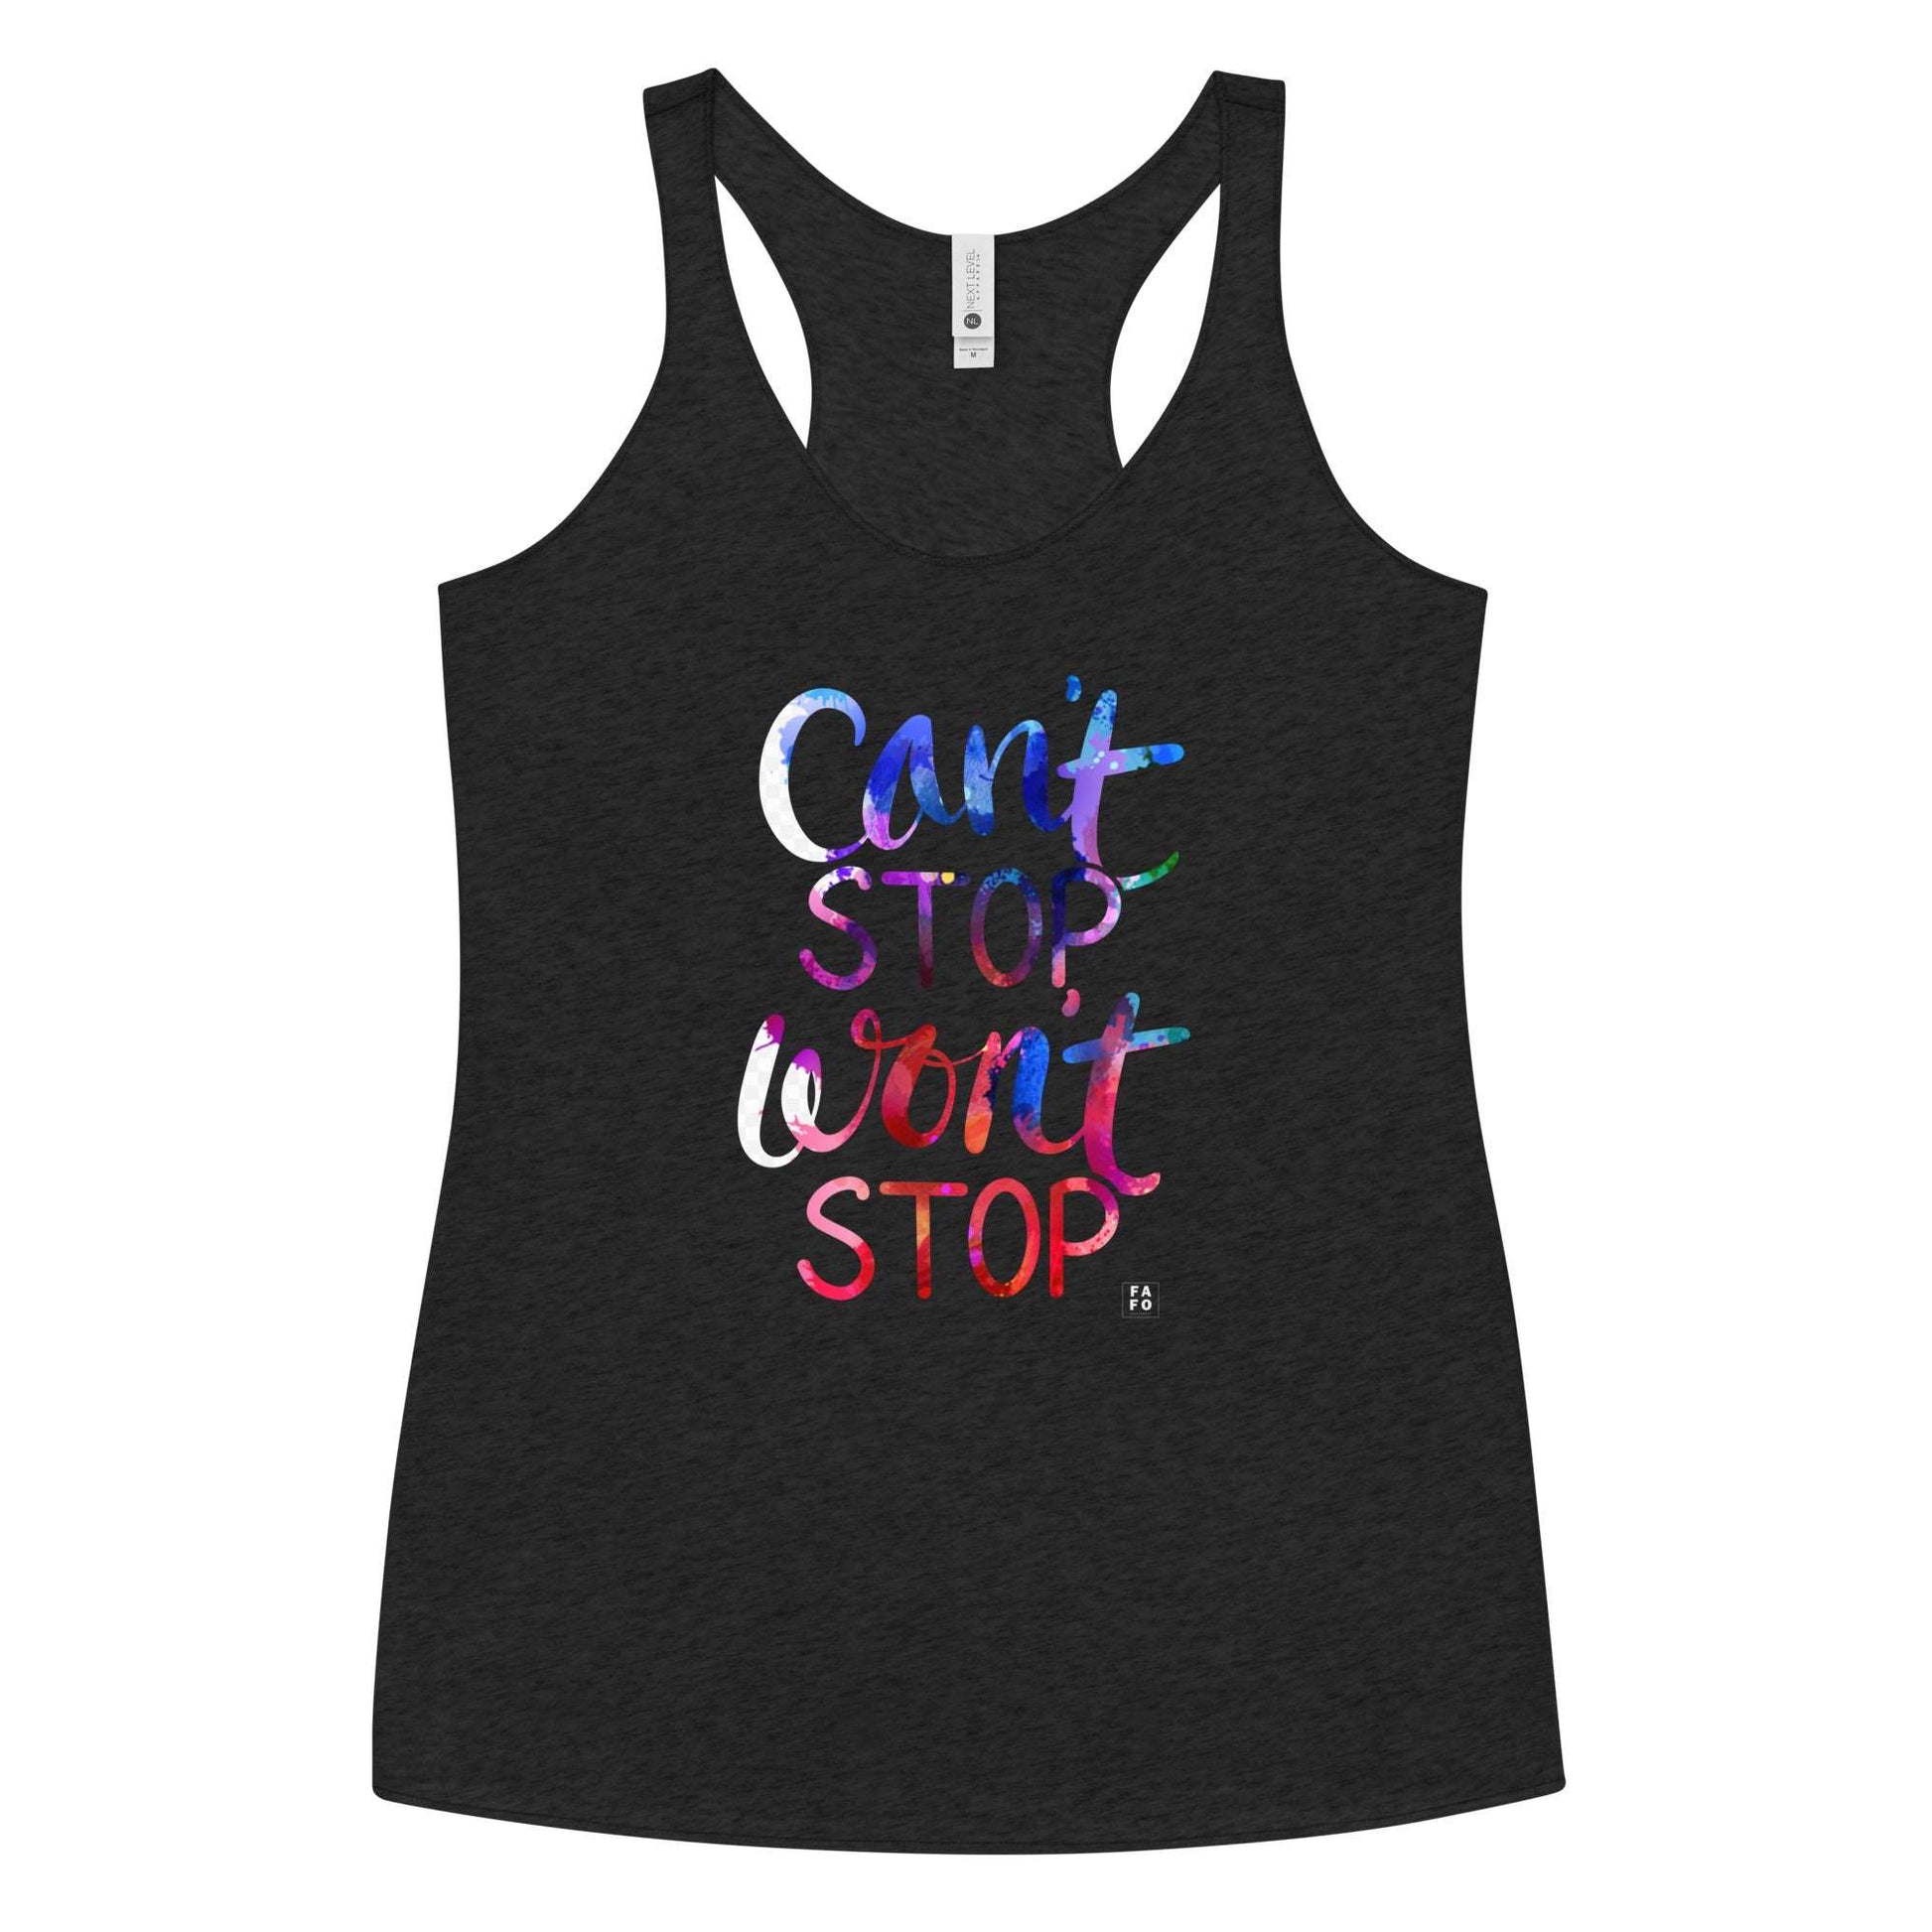 Next Level Racerback Tank - Can't Stop Won't Stop